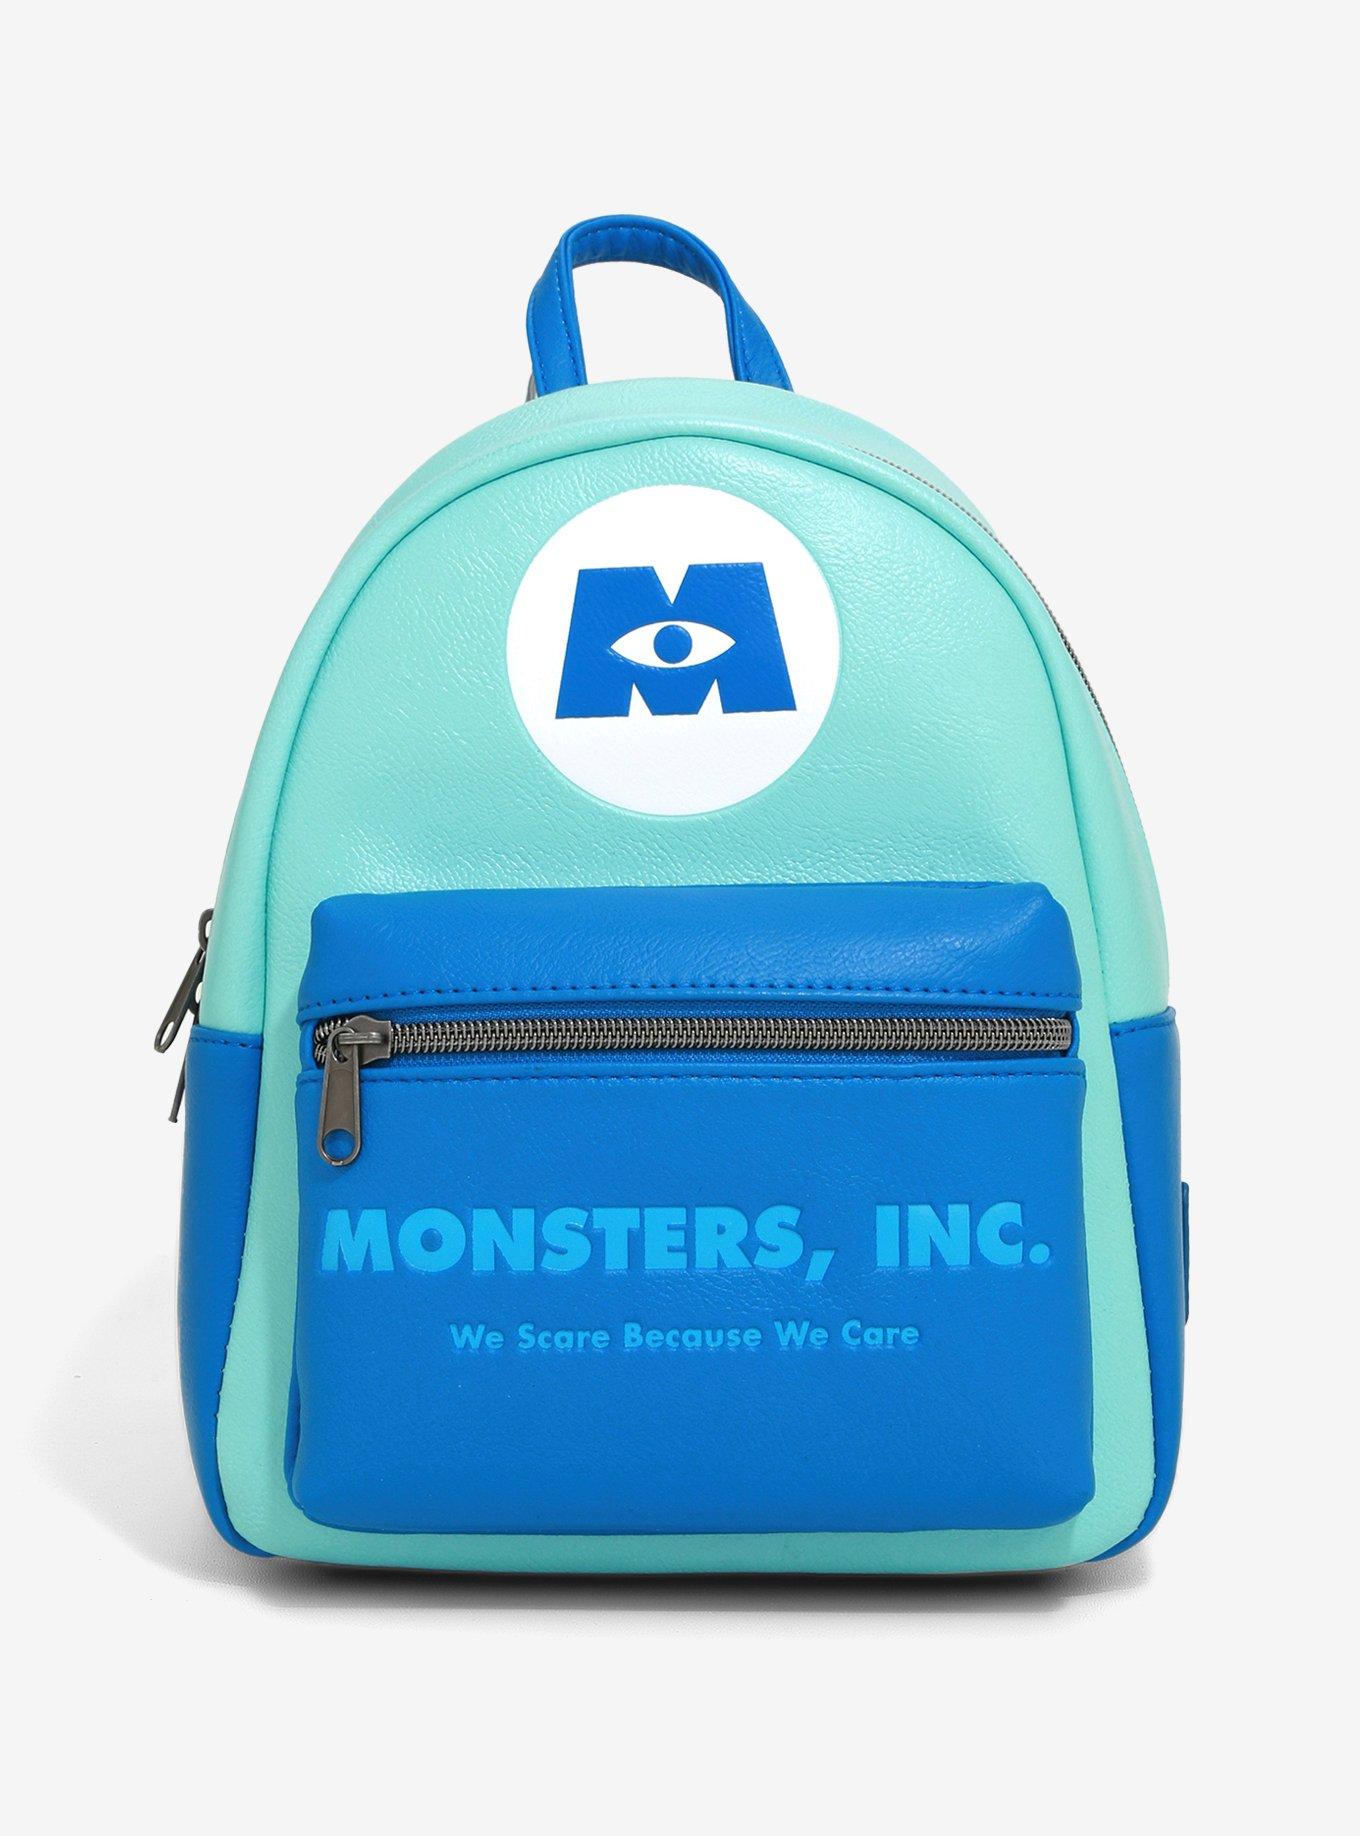 Disney Pixar Monsters, Inc. Scare Canister Duffel Bag - BoxLunch Exclusive